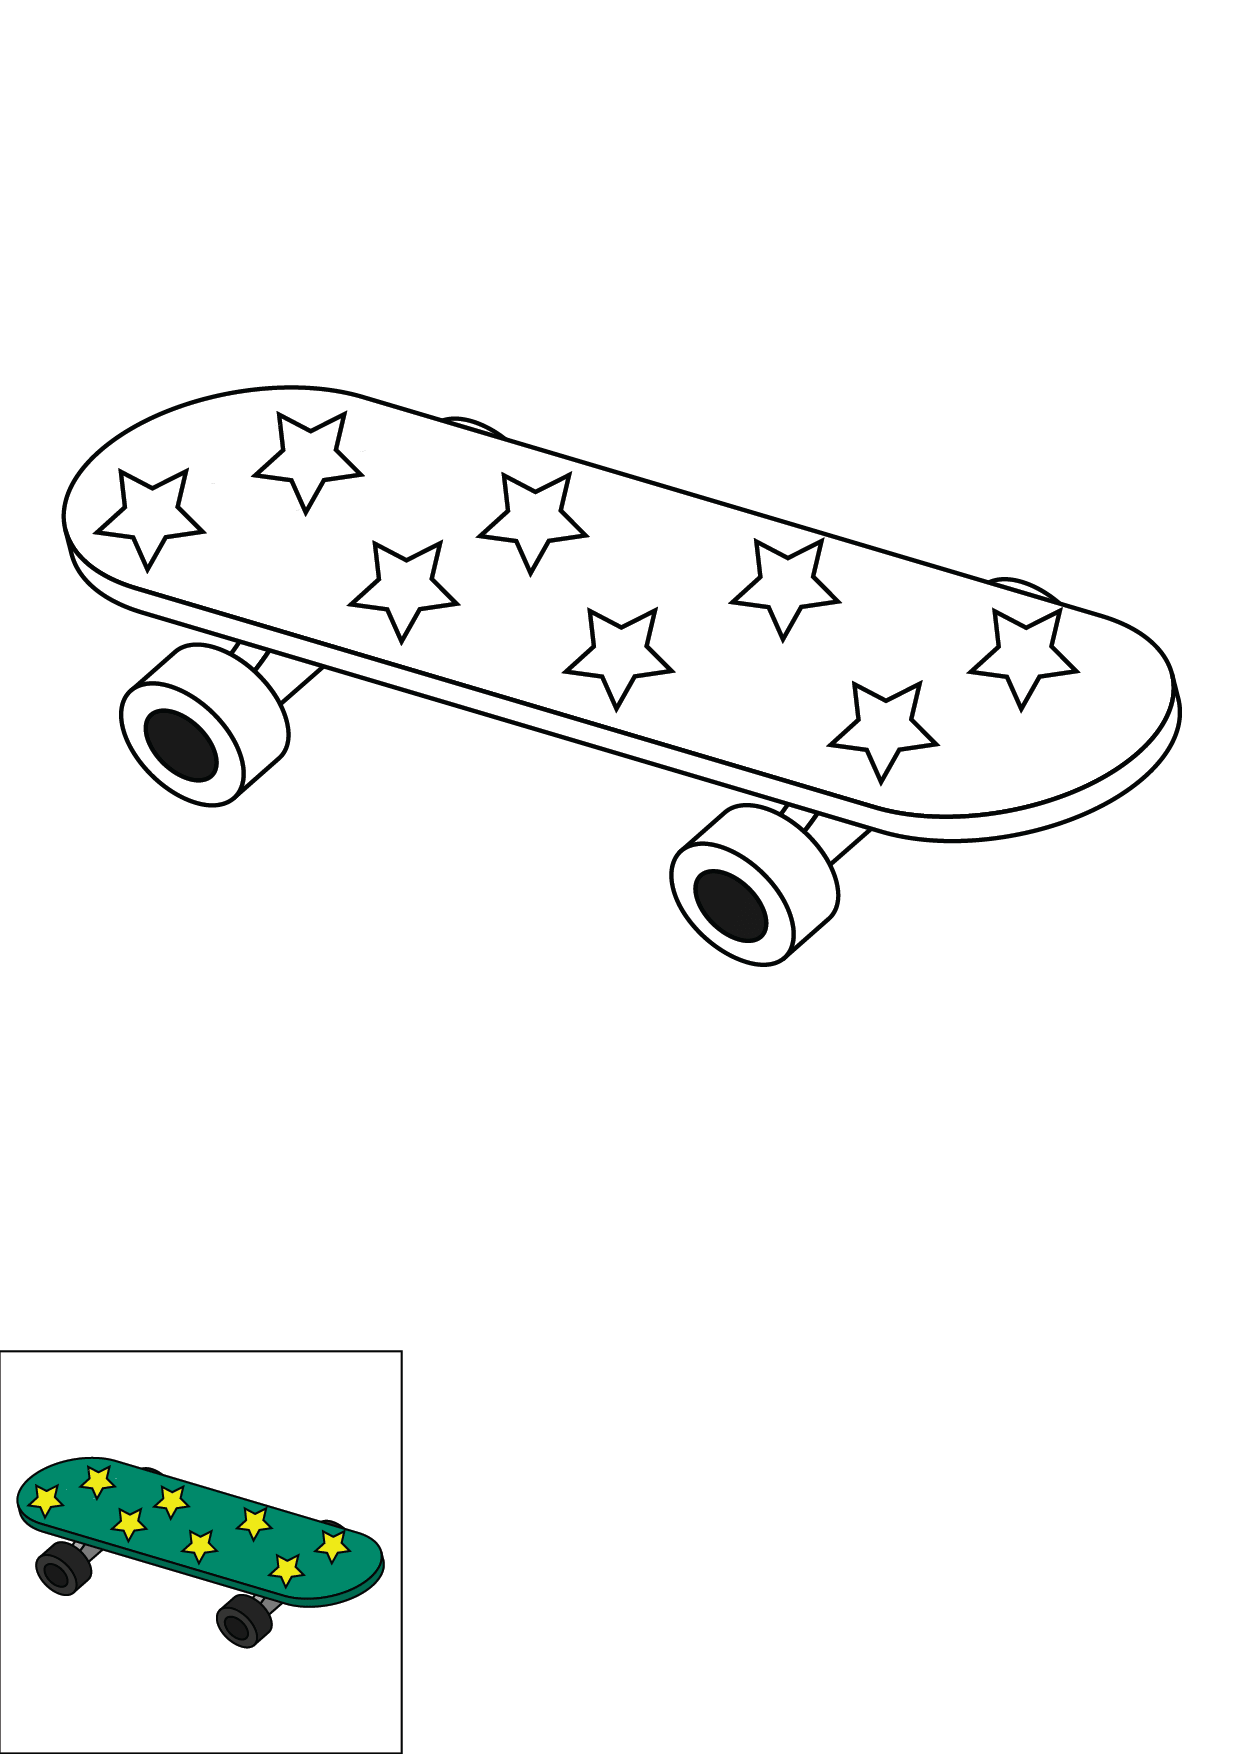 How to Draw A Skateboard Step by Step Printable Color